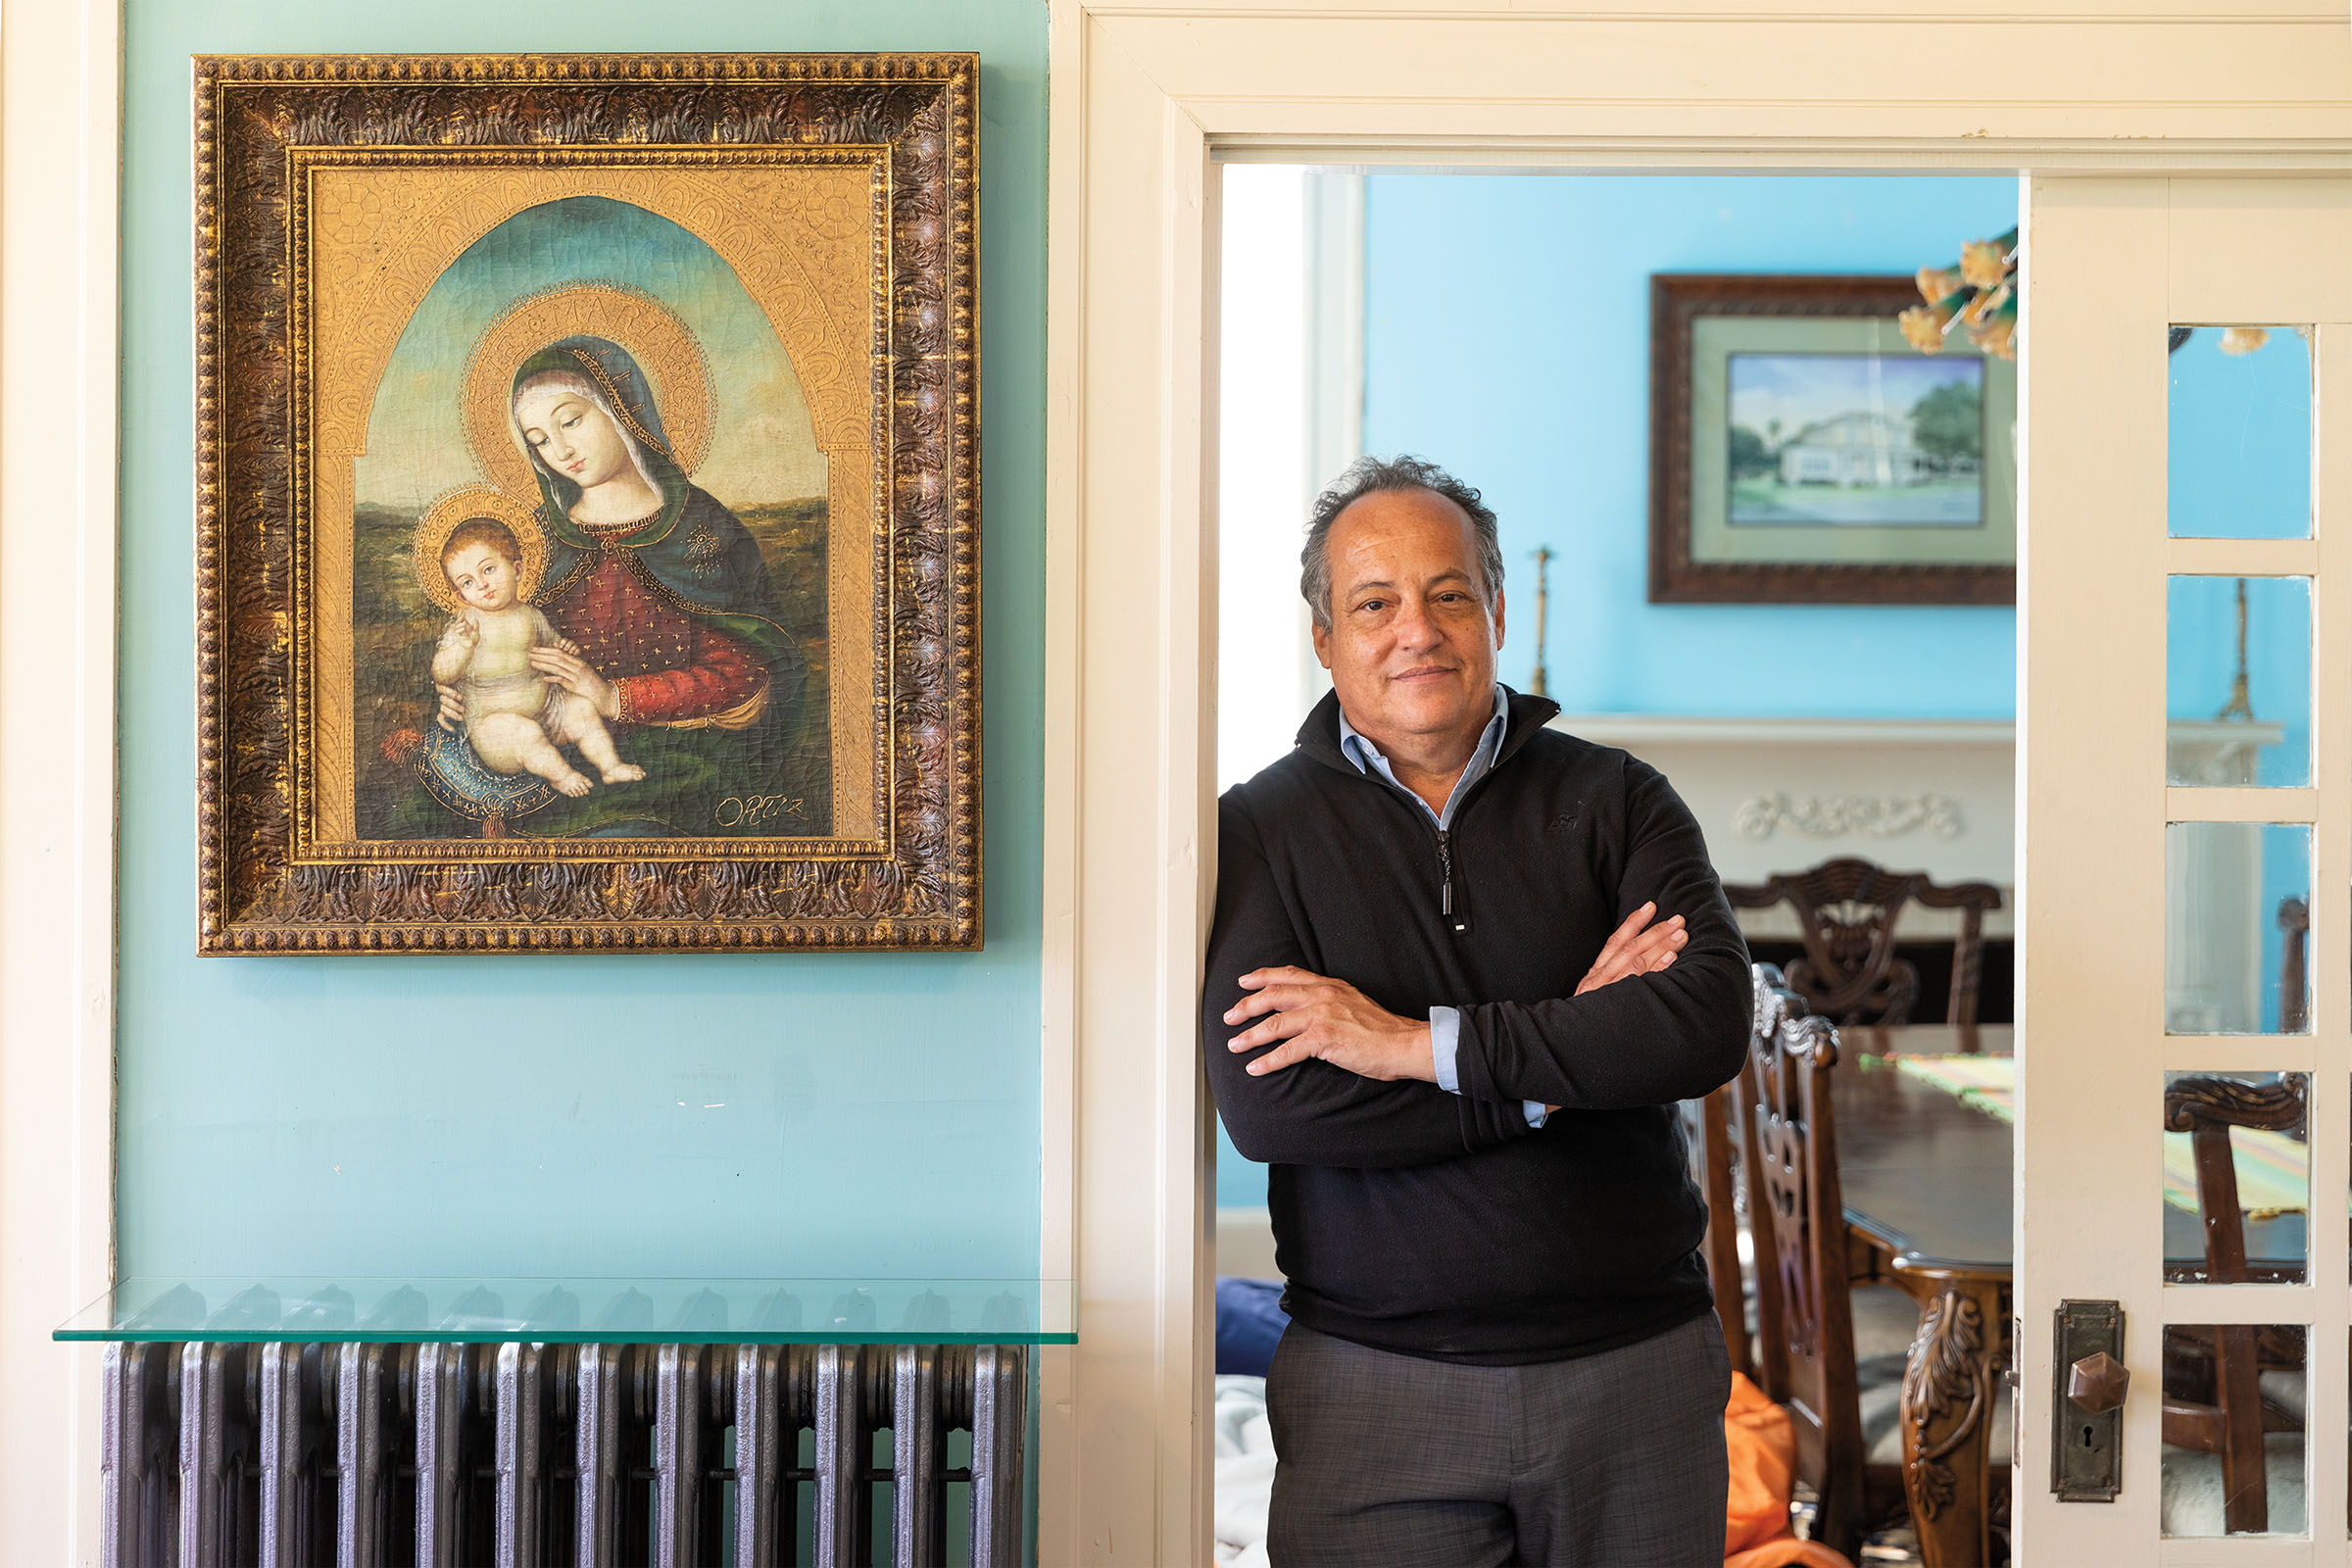 A man leans in the doorway inside of a historic home next to a religious painting on a turquoise wall